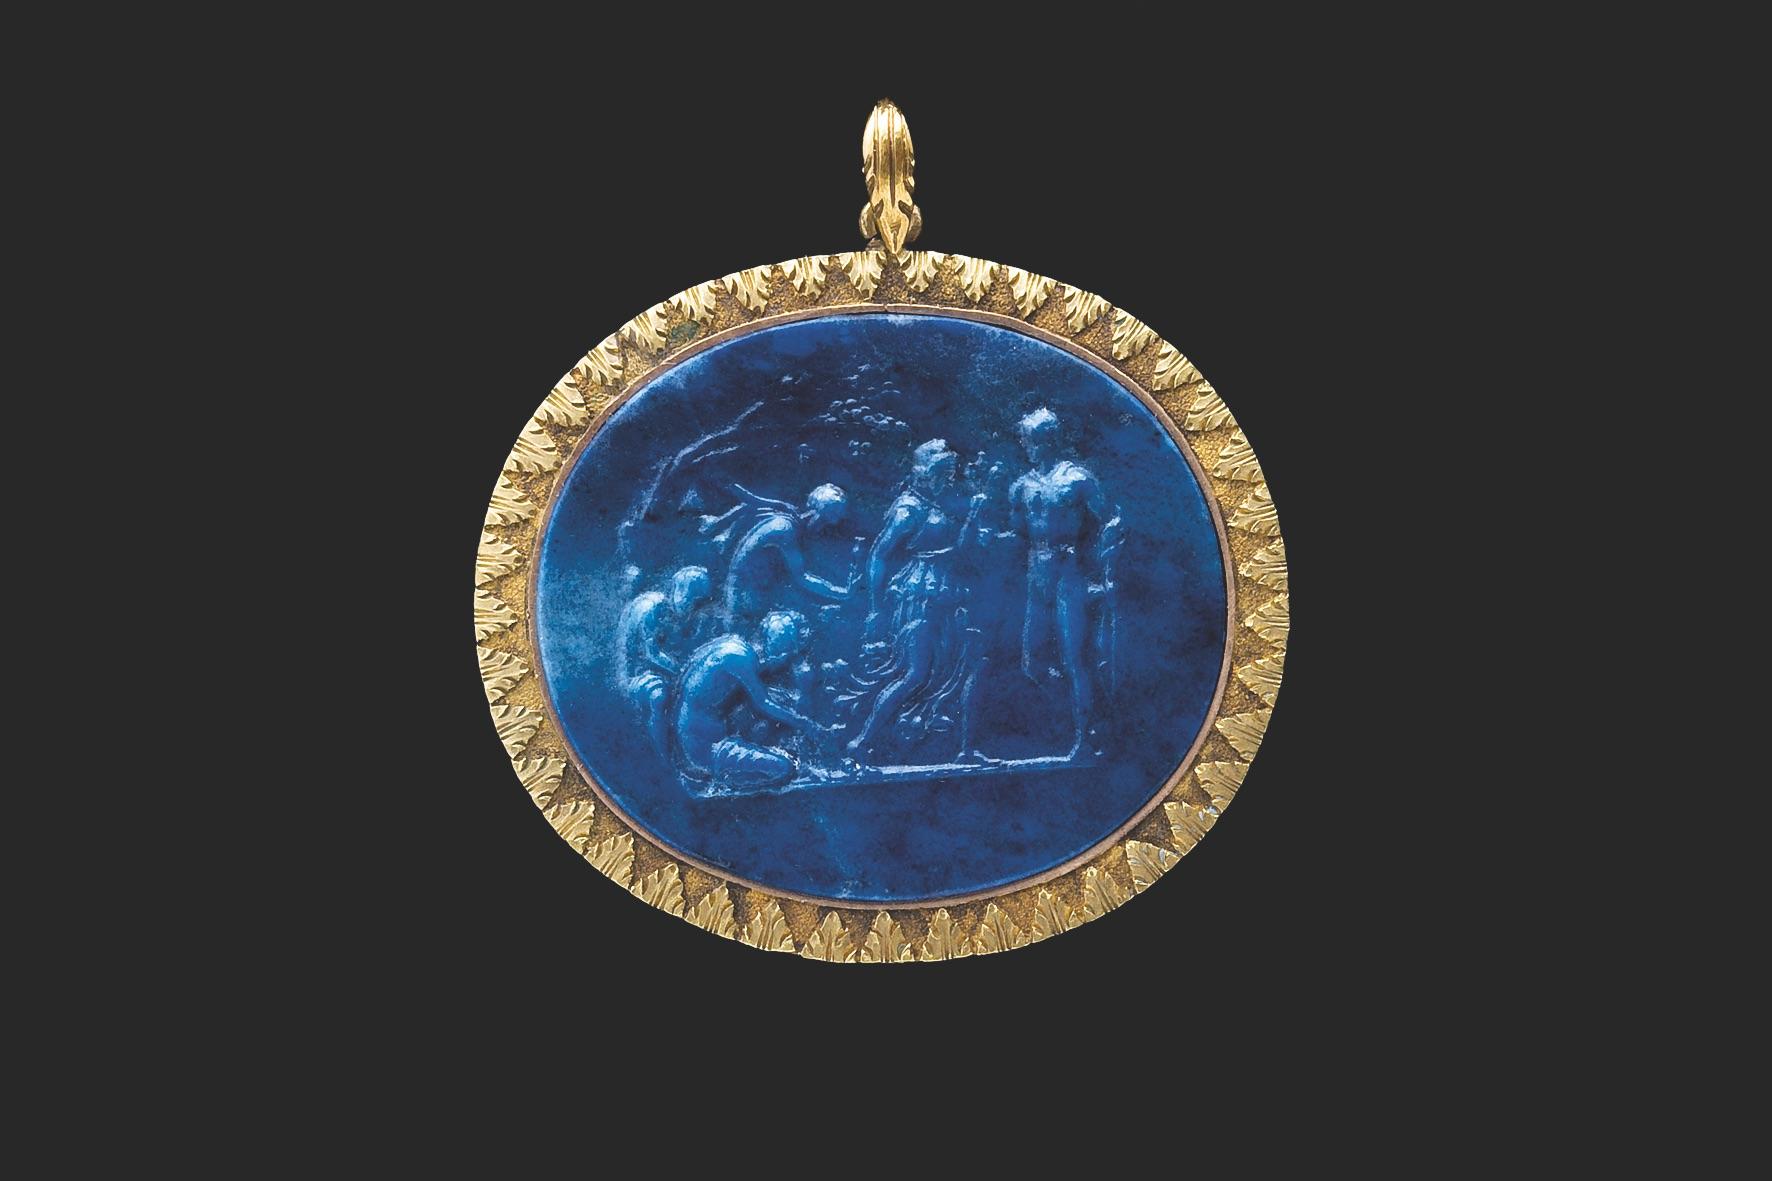 Antique Greek Mythology Cameo 18 K Gold Pendant Necklace Lapis Lazuli In Excellent Condition For Sale In Munich, Bavaria